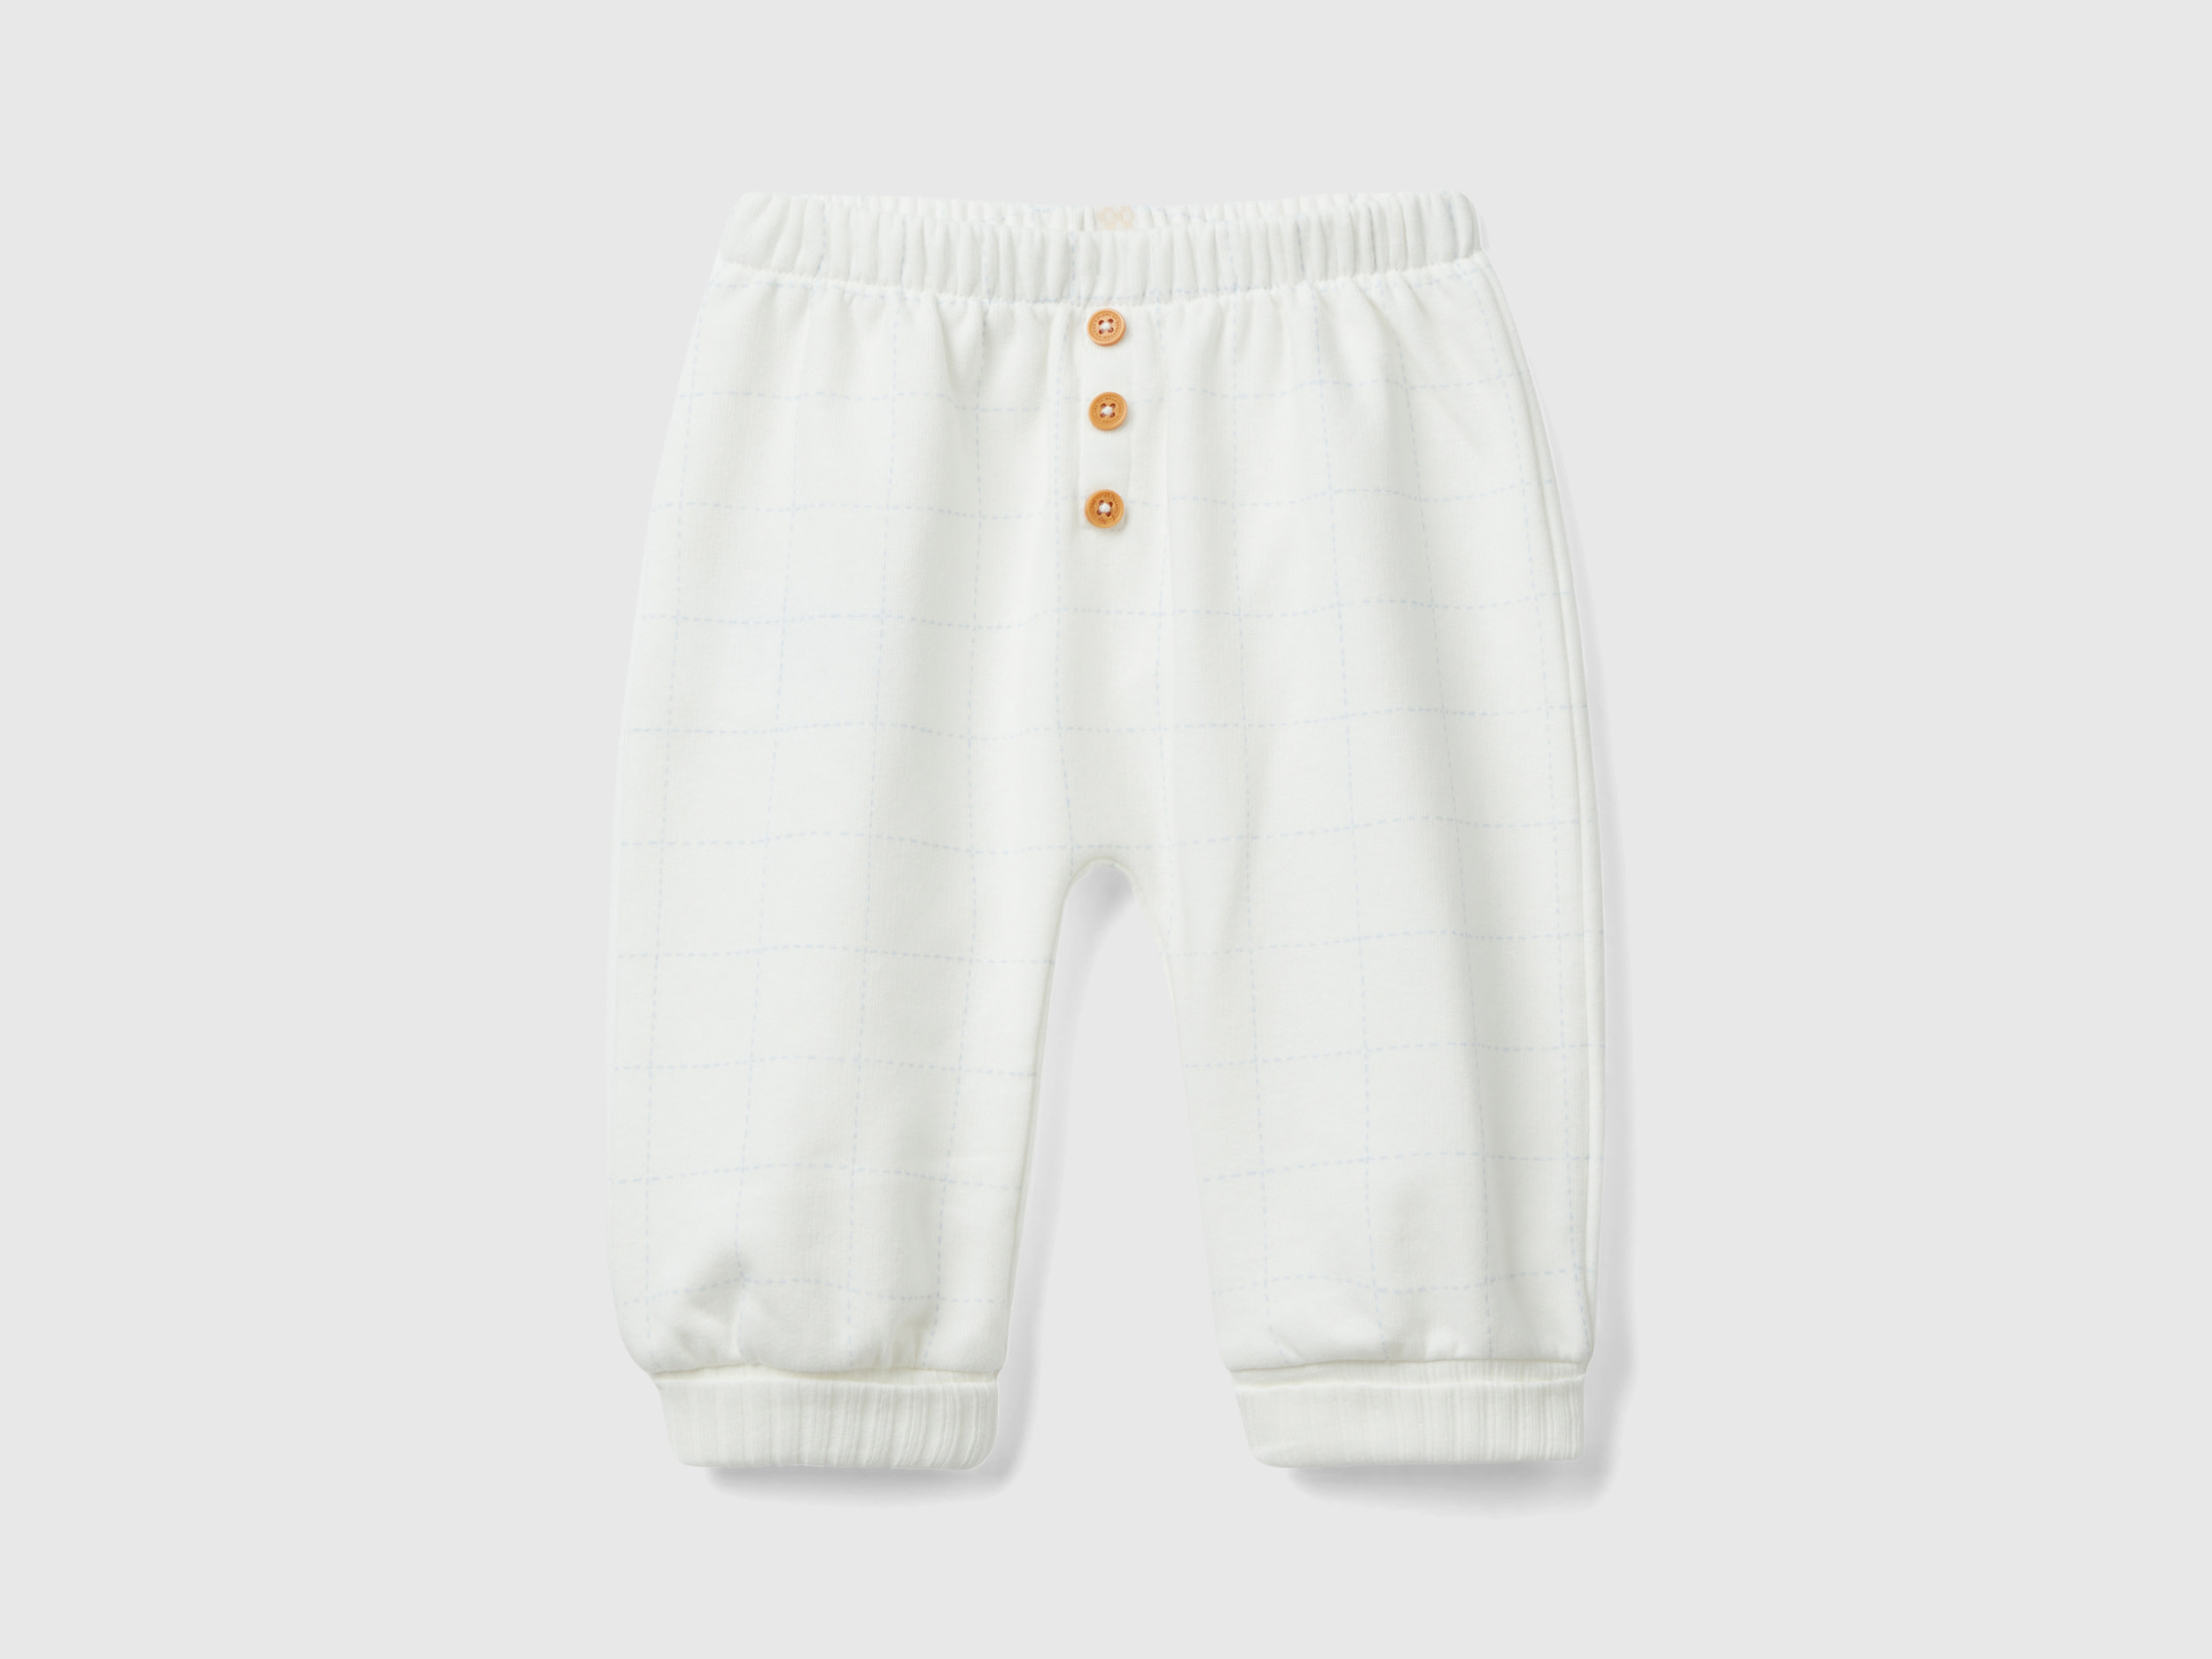 Benetton, Sweatpants With Buttons, size 0-1, Creamy White, Kids